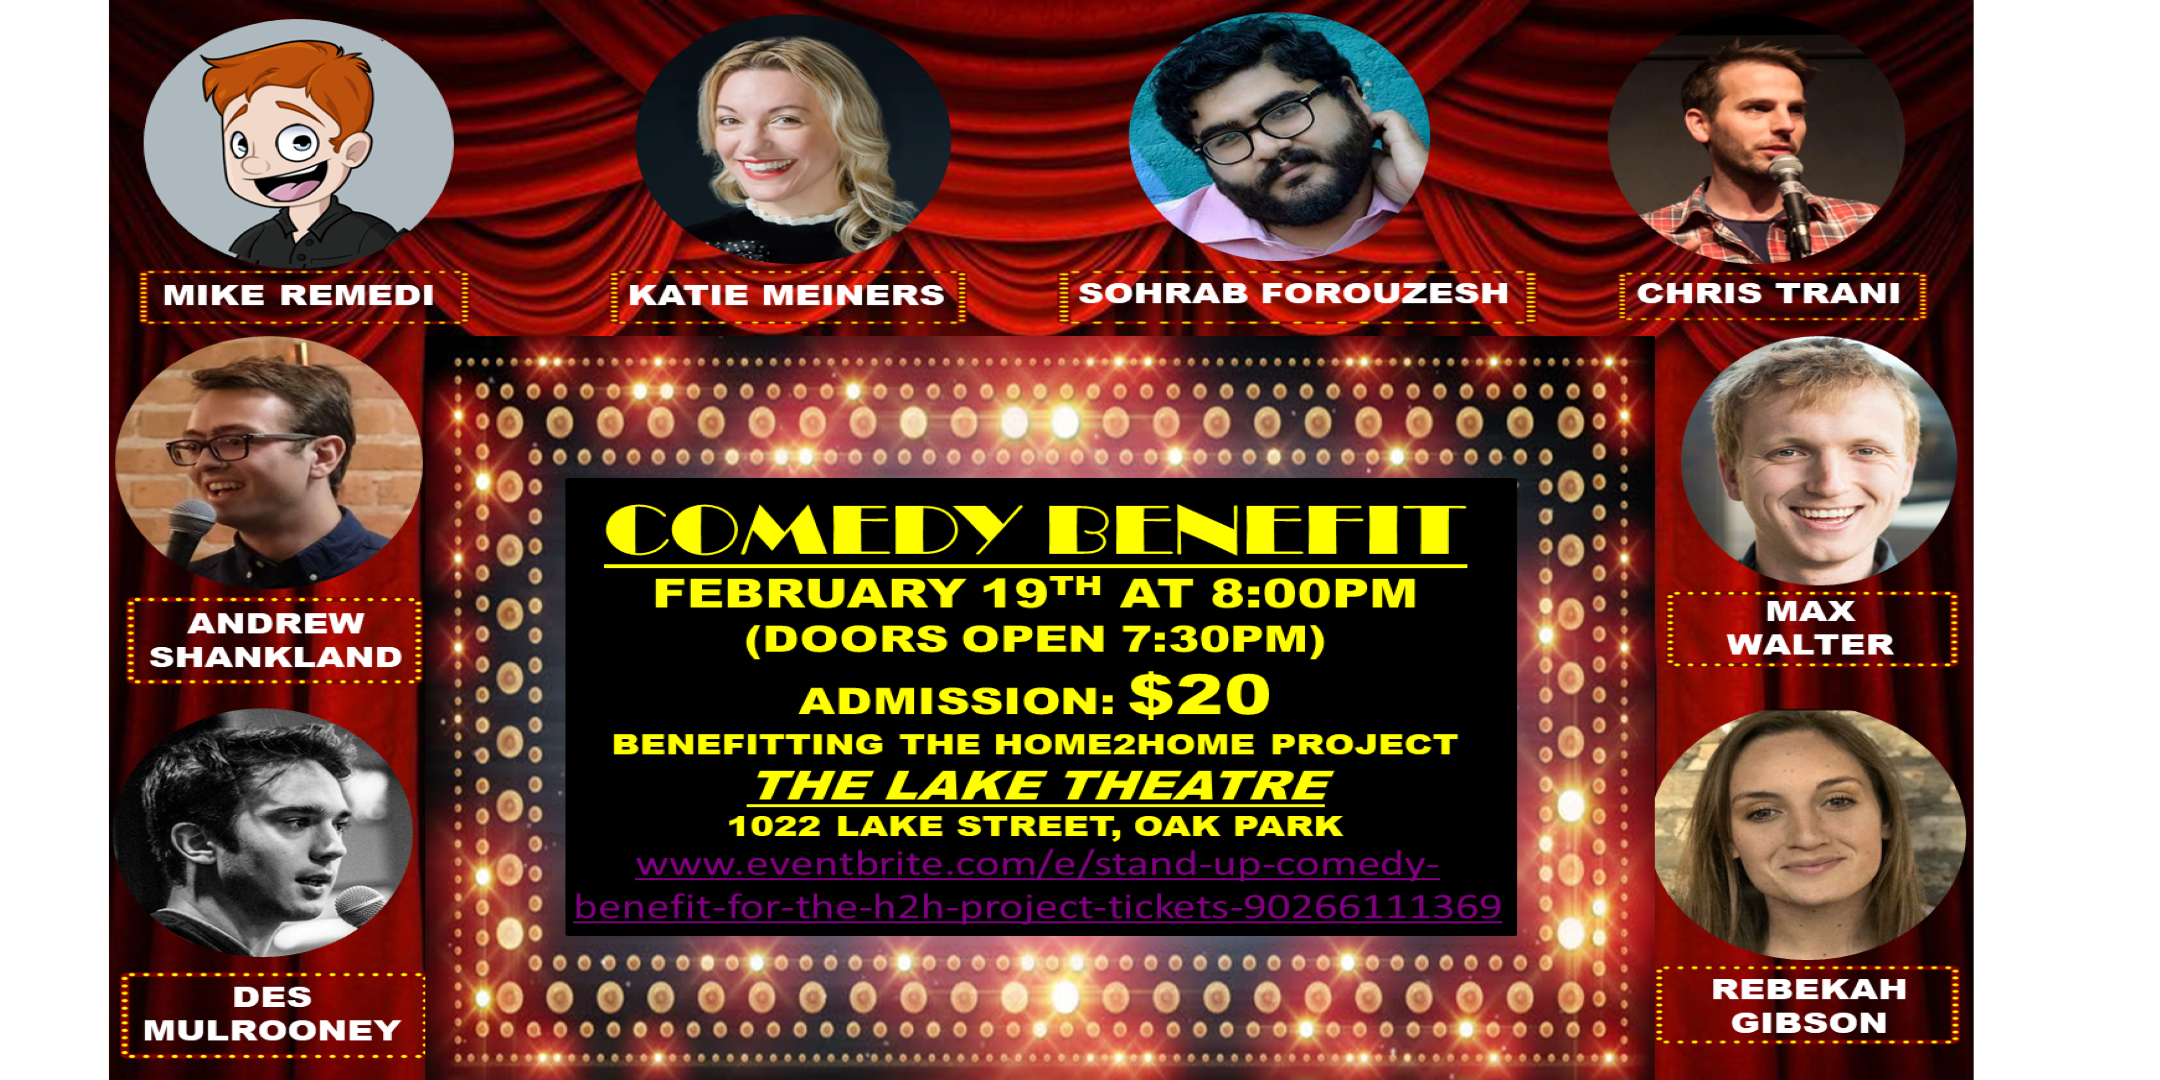 Stand-Up Comedy Benefit for the H2H Project